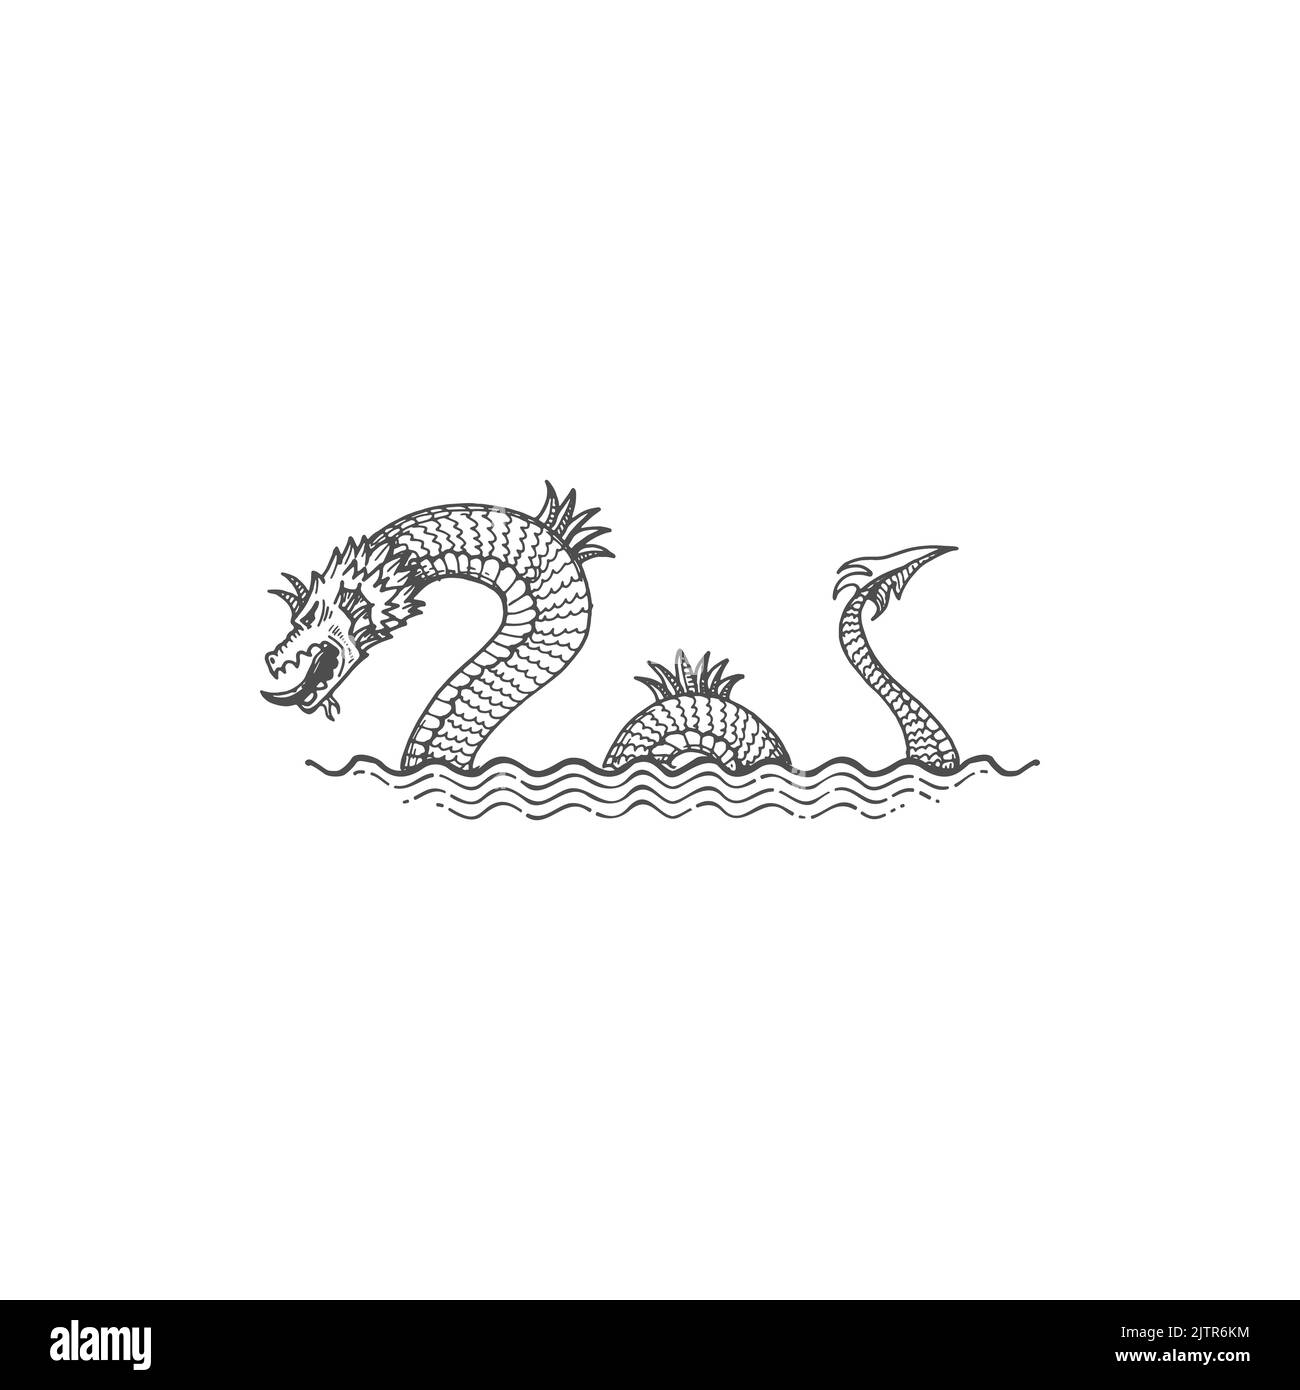 Sea serpent dragon bakunawa isolated water beast sketch icon. Vector mythological dragon in sea or ocean water waves, underworld mythical creature. Fairytale underwater animal, vintage giant dragon Stock Vector